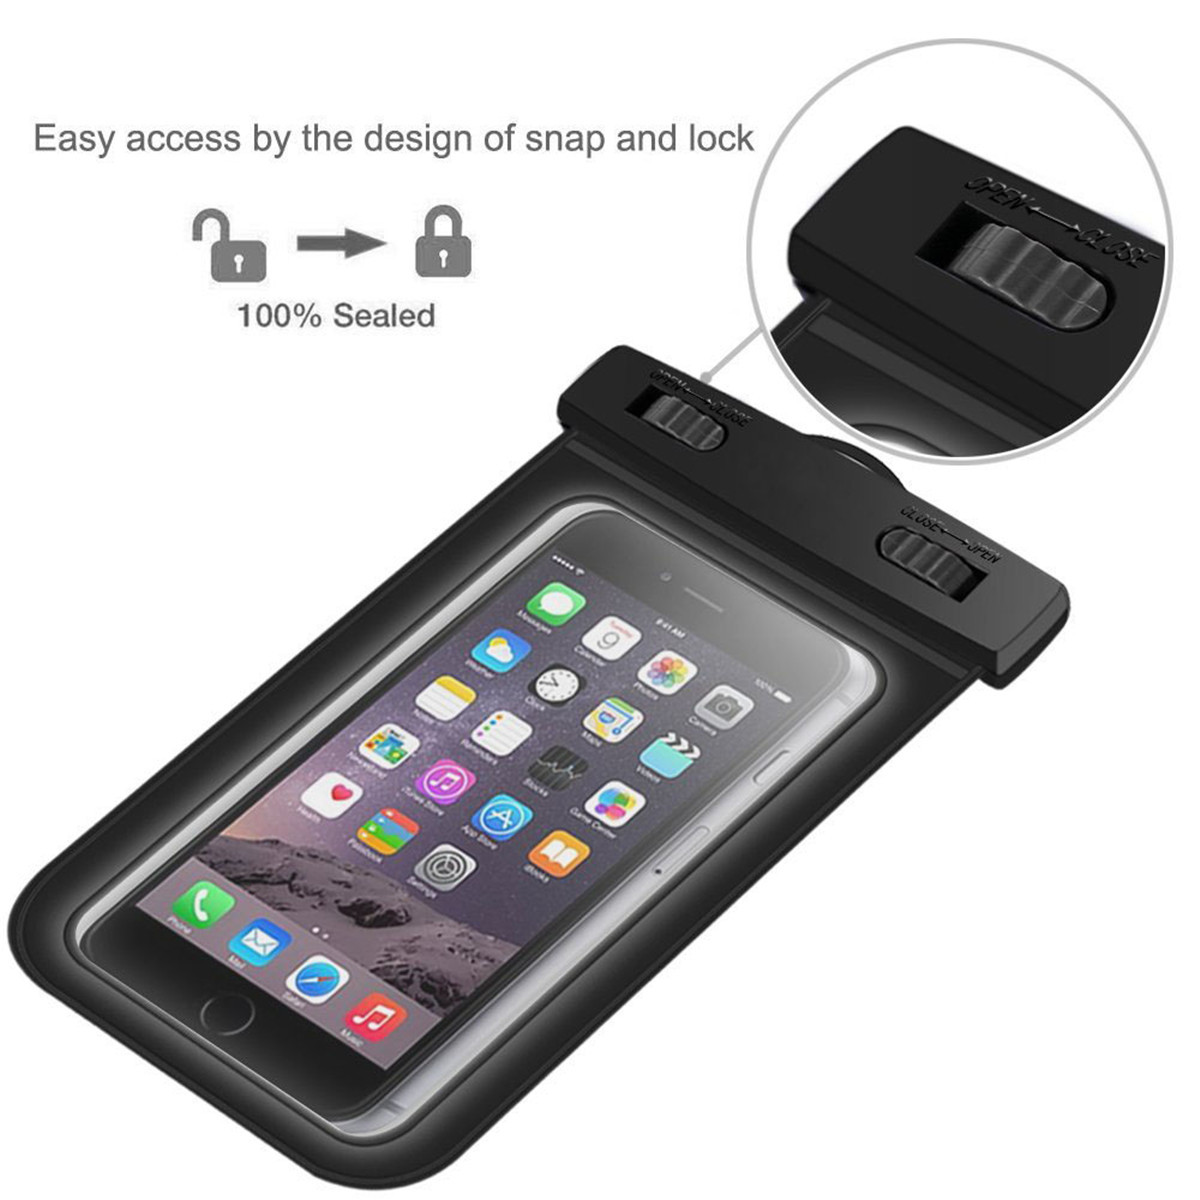 Portable-HD-Touch-Screen-Mobile-Phone-Waterproof-Dry-Bags-Swimming-Ski-Sports-Packs-for-iPhone-Devic-1890828-4